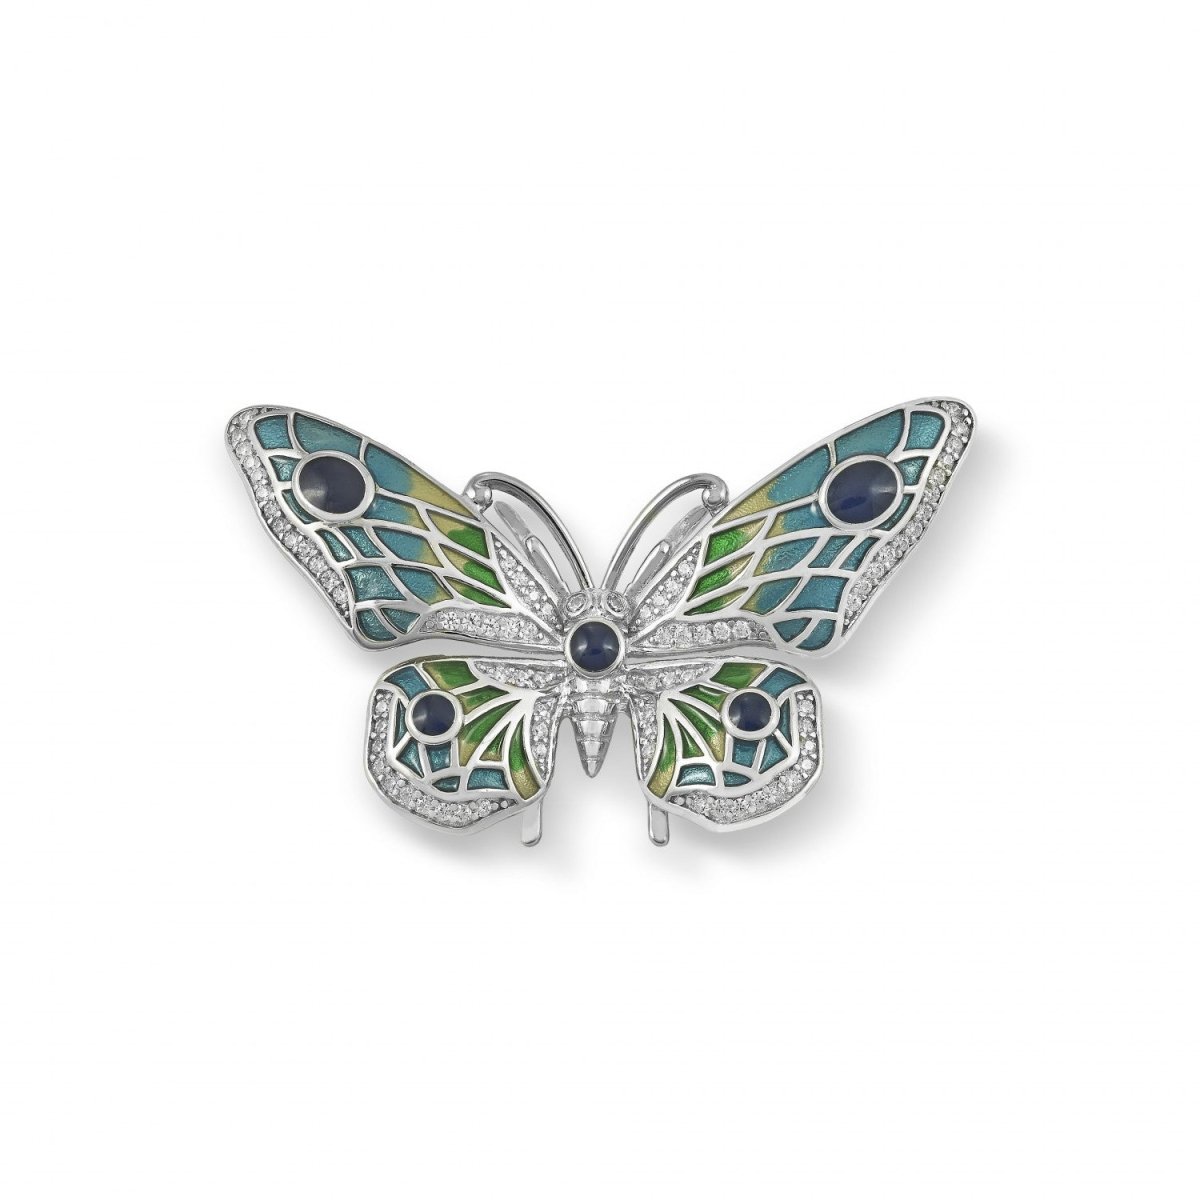 Brooch - Butterfly design silver brooch with colored stones